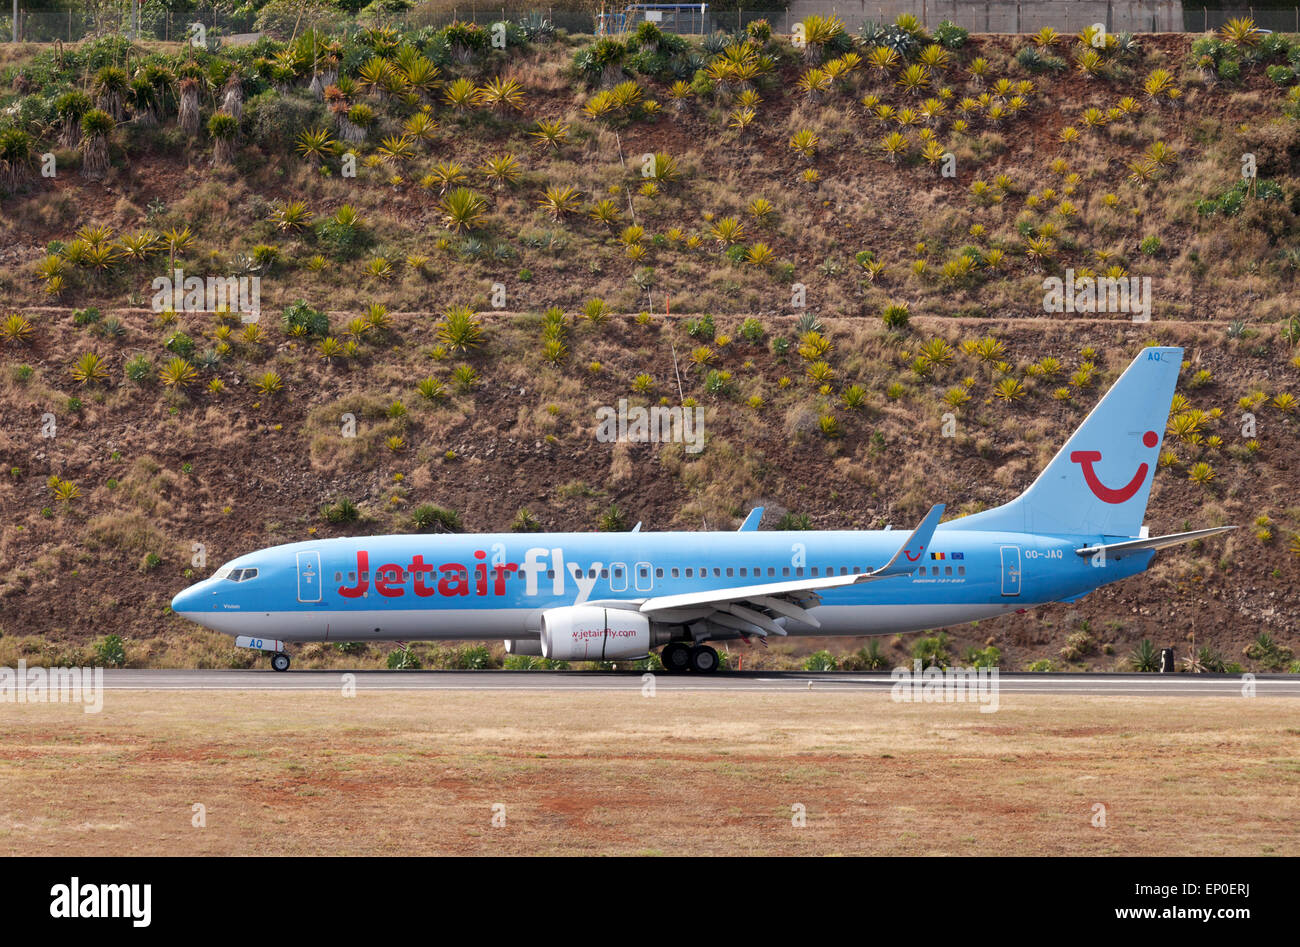 A Jetairfly Boeing 737-800 plane on the ground at Funchal airport, Madeira, Europe. Stock Photo